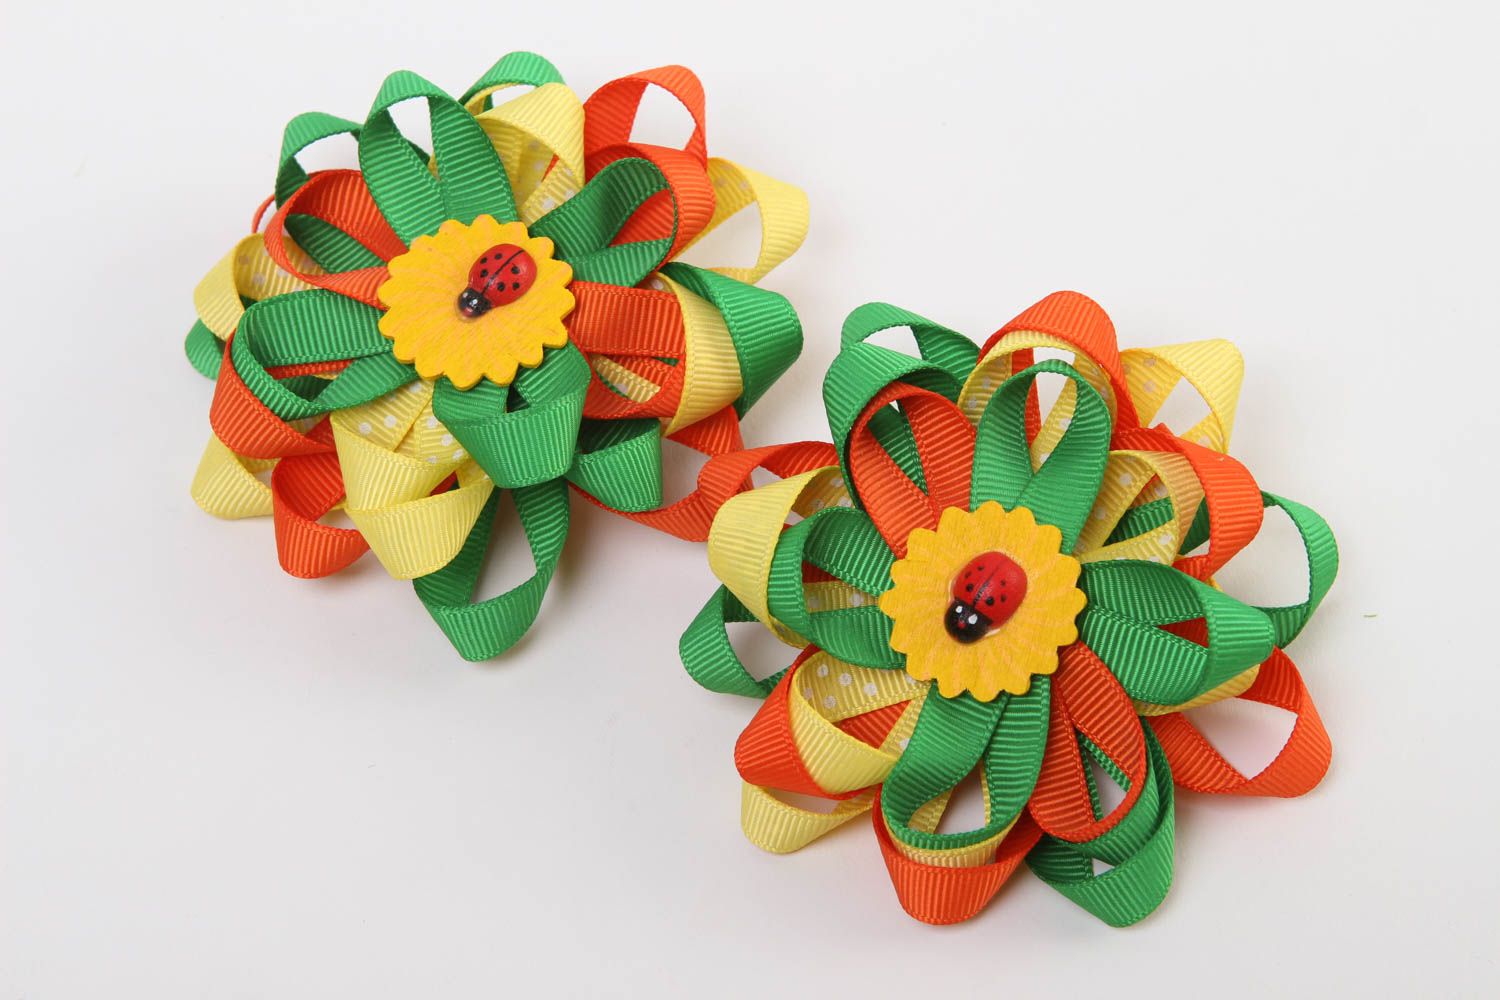 Handmade designer hair clips 2 unusual large hair clips textile accessories photo 2